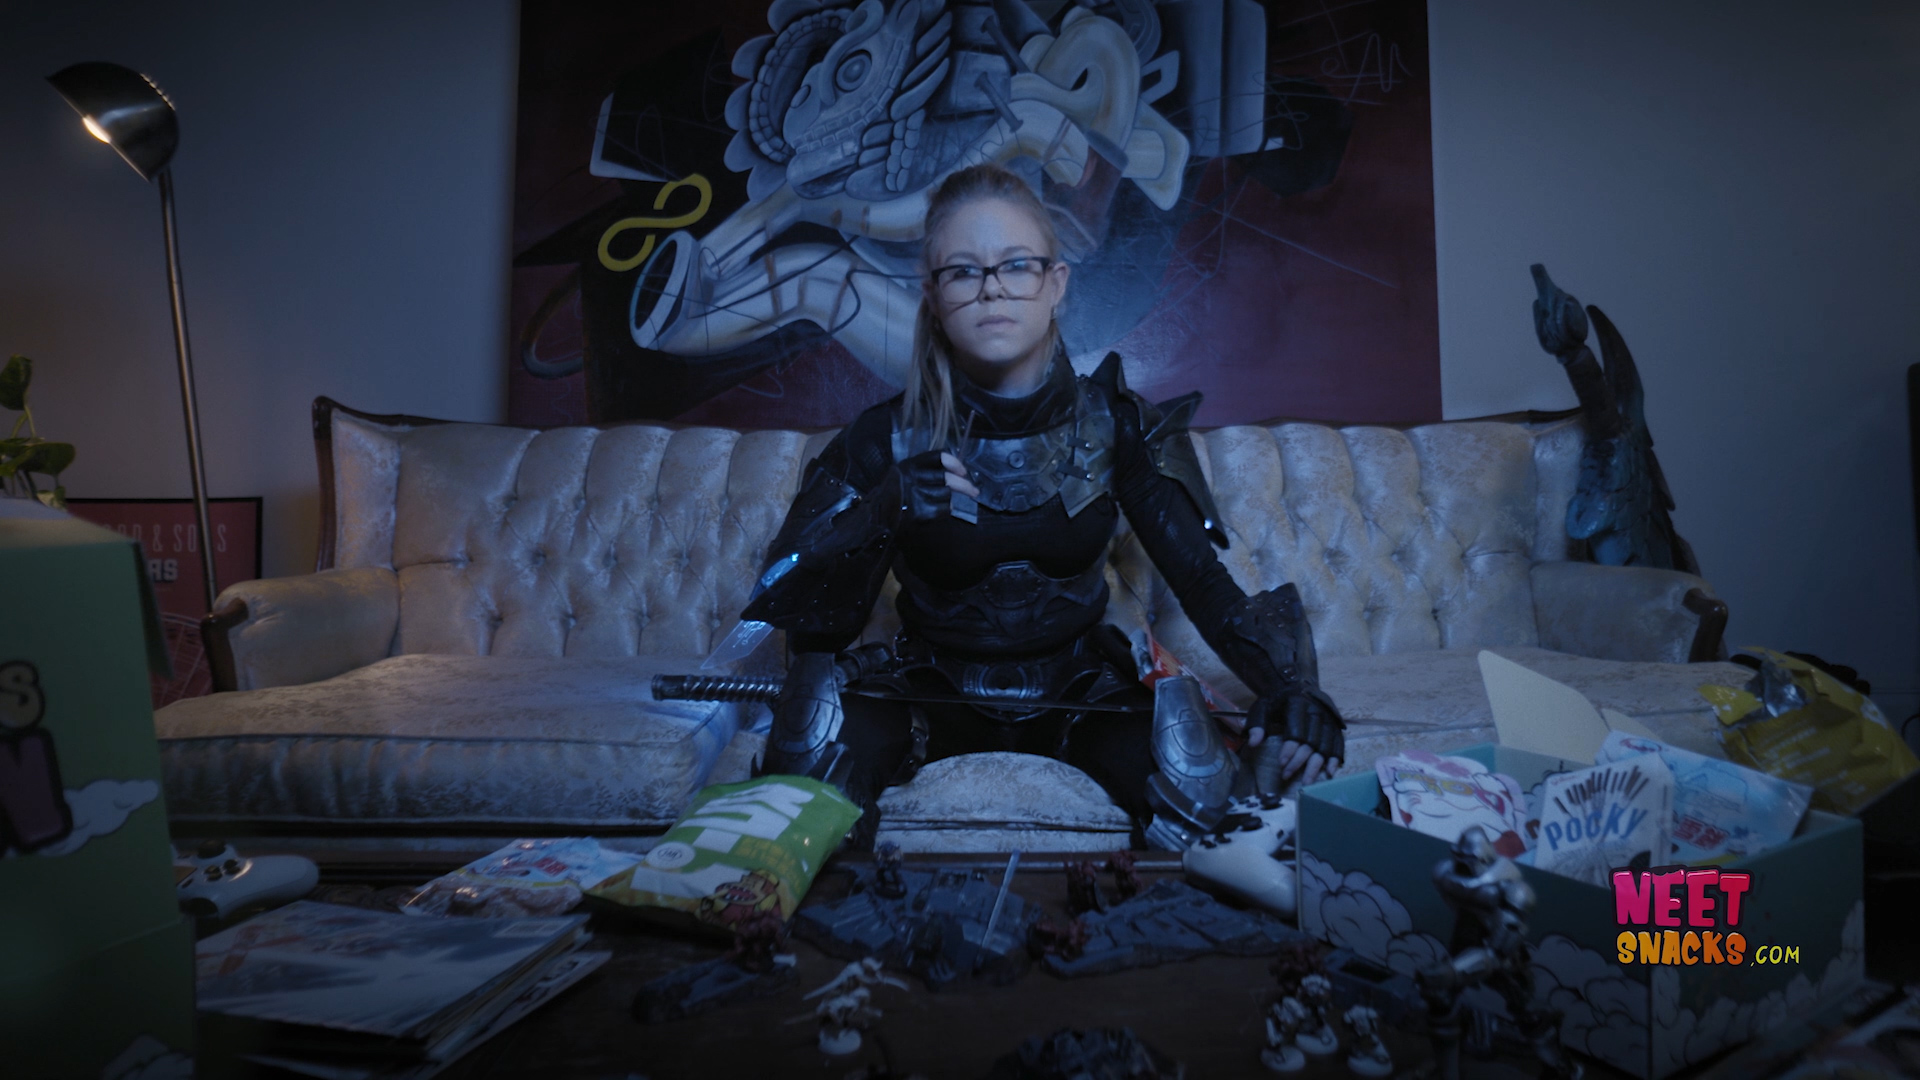 A young girl in glasses in science fiction armor sits on the couch of a dorm room. A board game and snacks is on the coffee table in front of her.